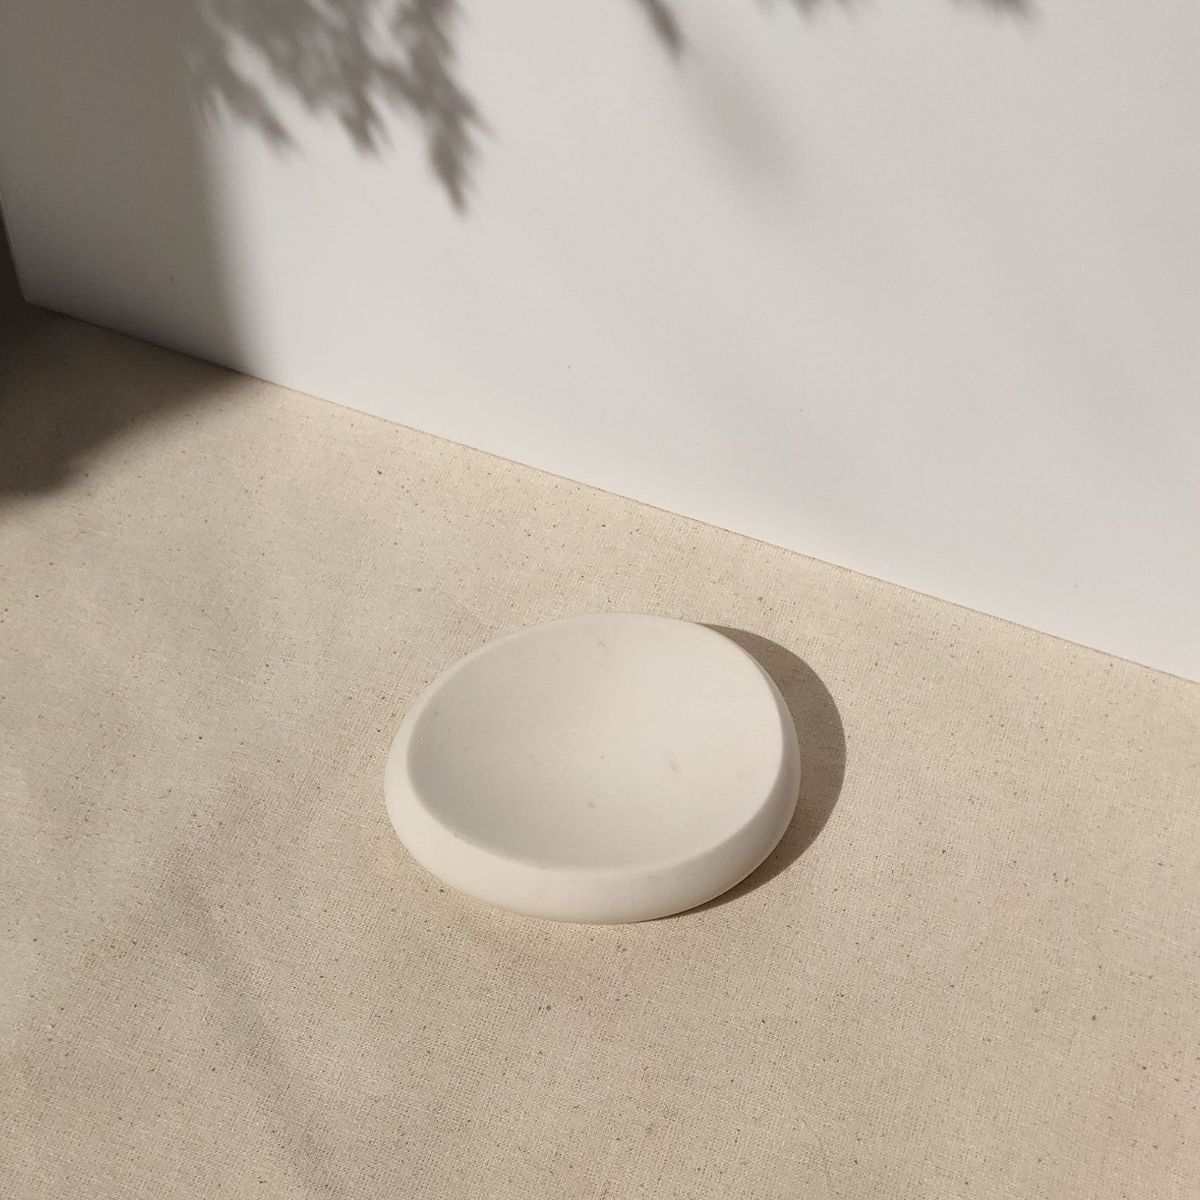 white jewellery dish made in the UK by Moonkind Studios, perfect for dainty earrings, rings and necklaces